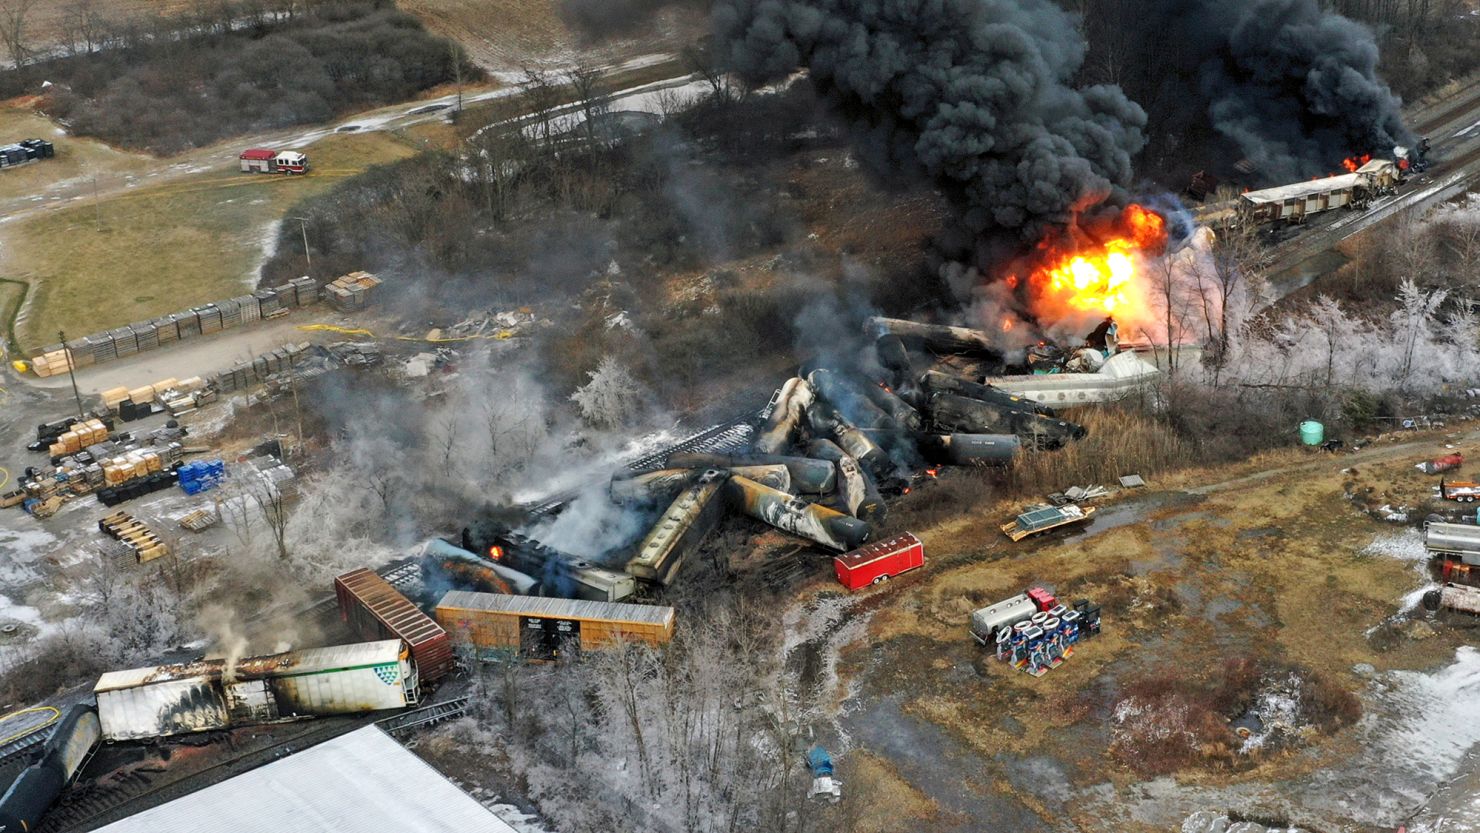 Portions of the Norfolk Southern freight train that derailed are seen in this photo taken a day after the derailment.